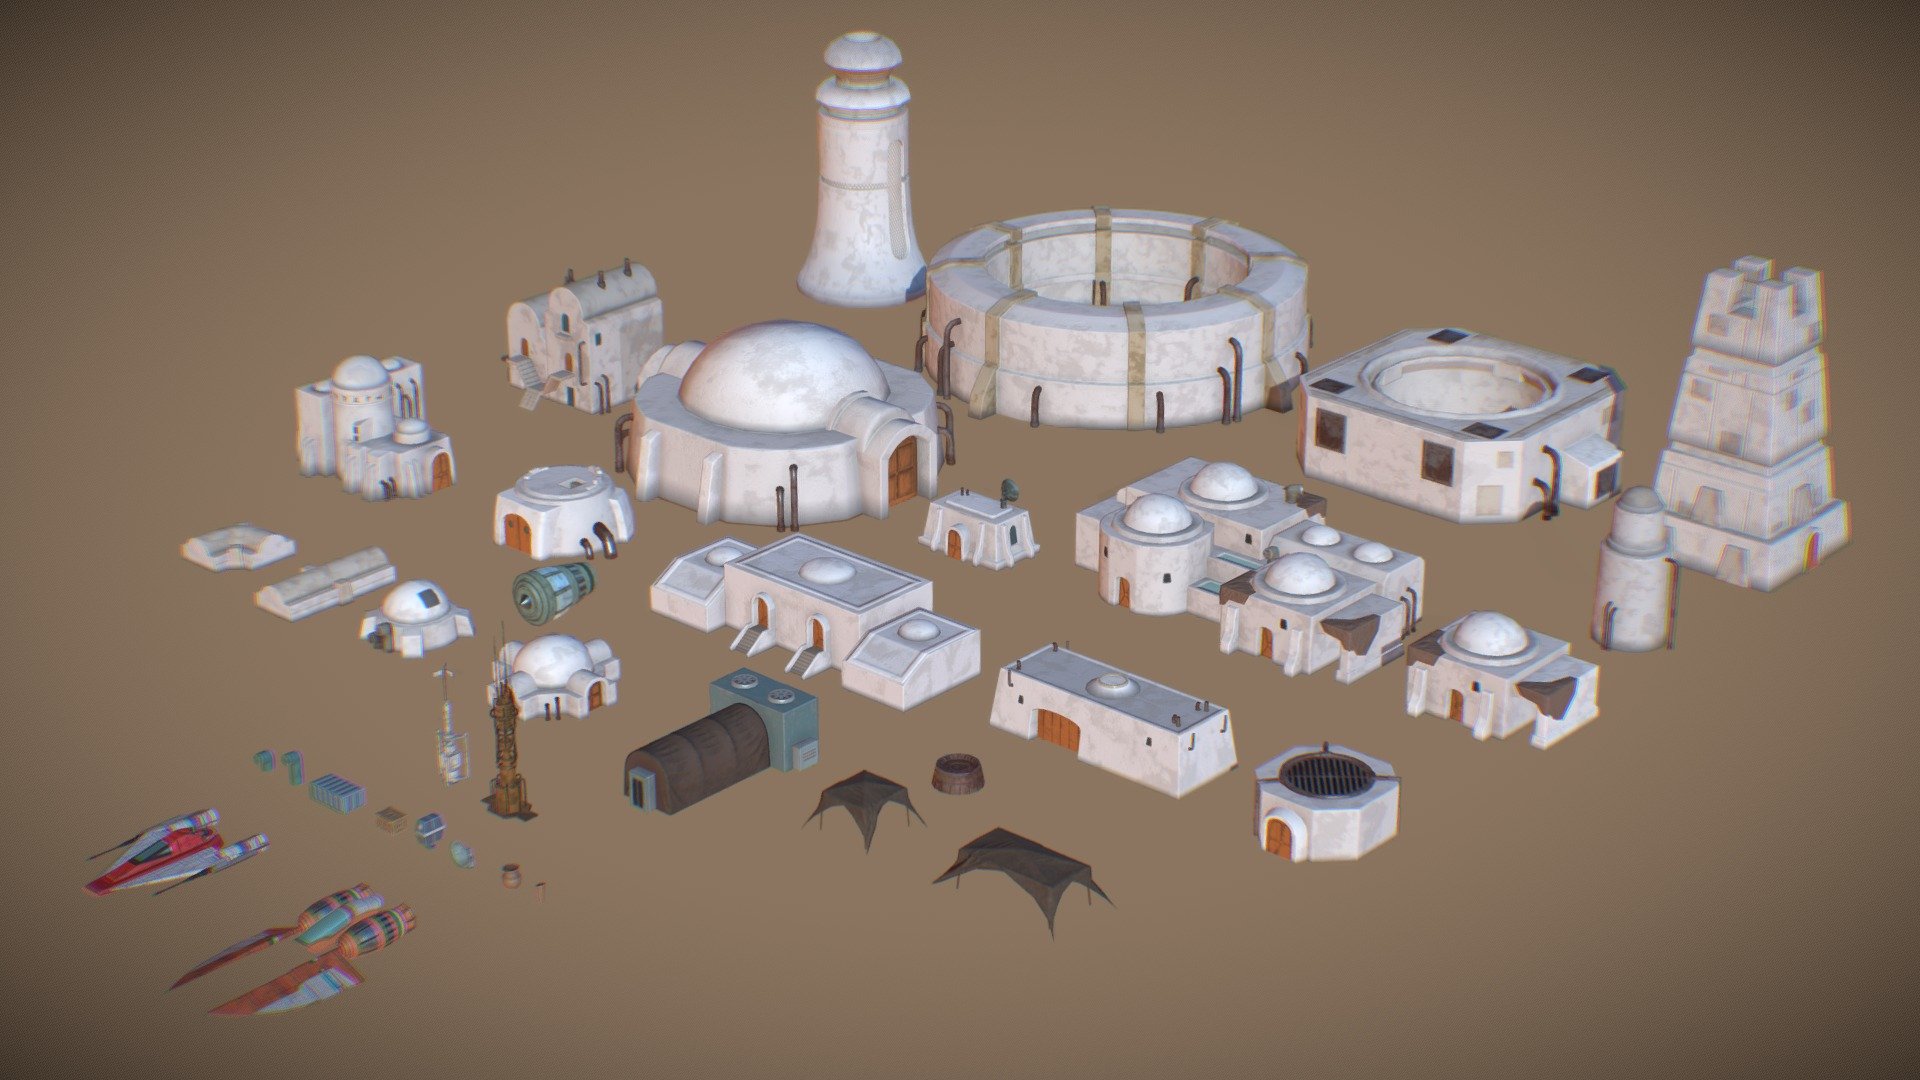 Using the &ldquo;3D LowPoly Star Wars Tatooine Houses Set